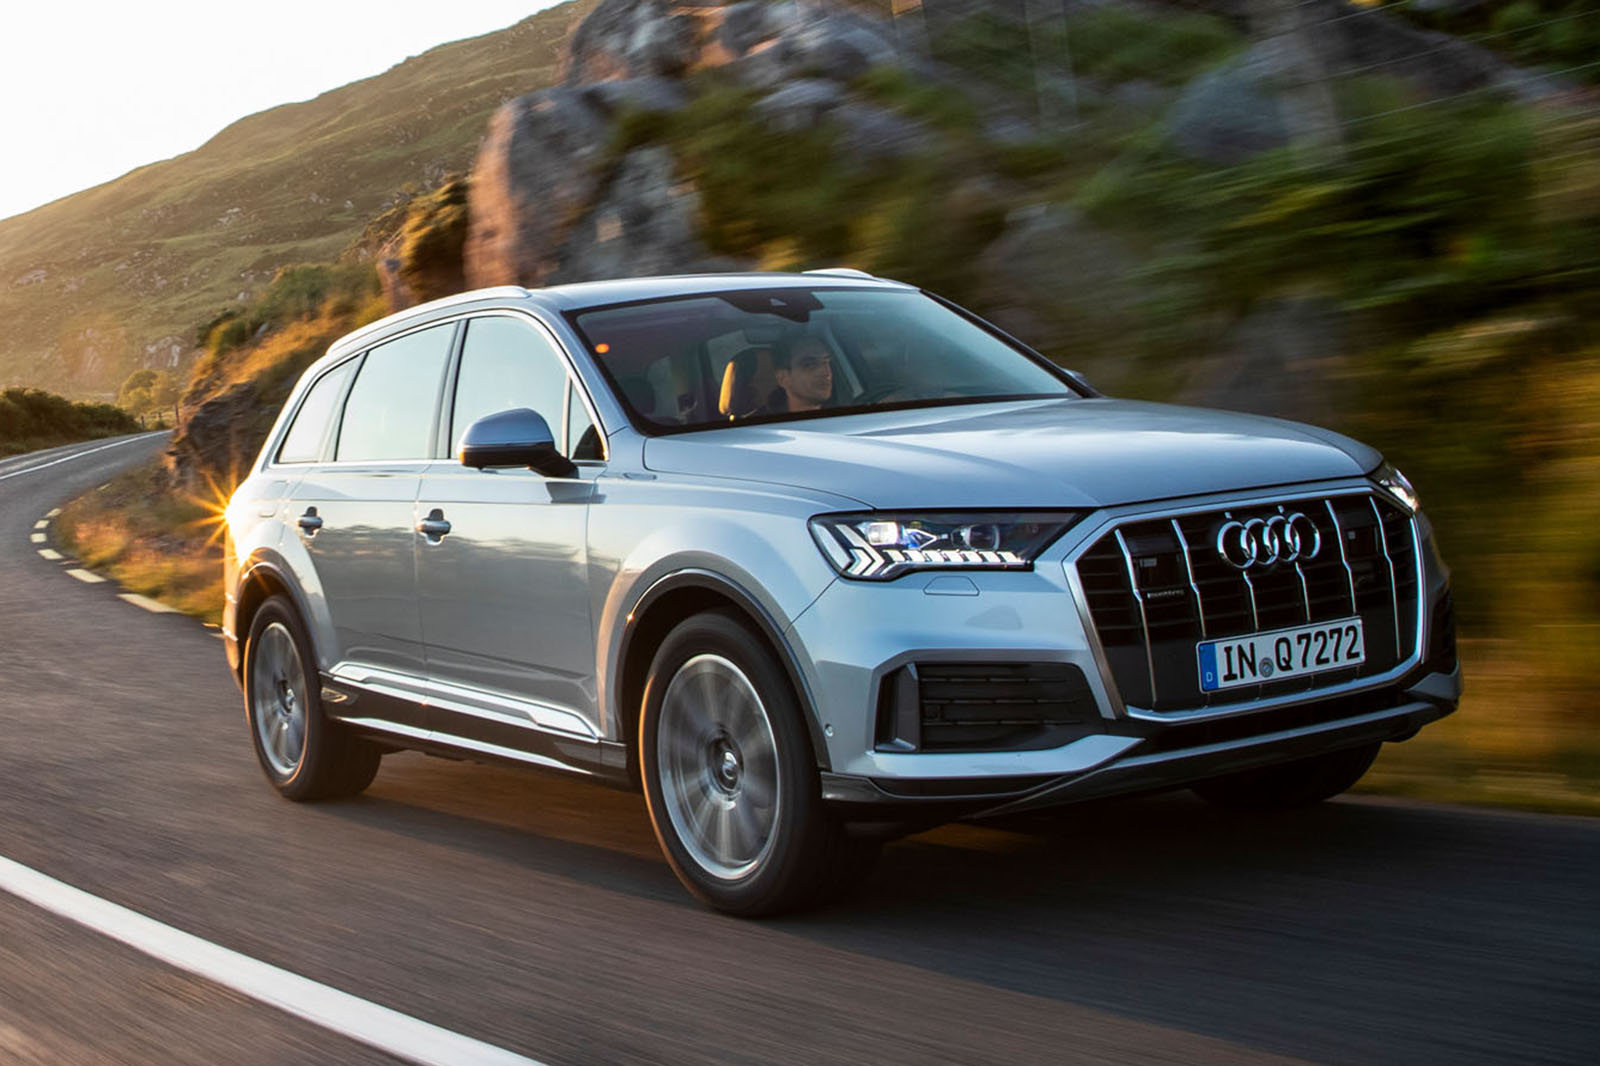 The Audi Q8 TFSIe Plug-In Hybrid SUV: The Complete Guide For Ireland